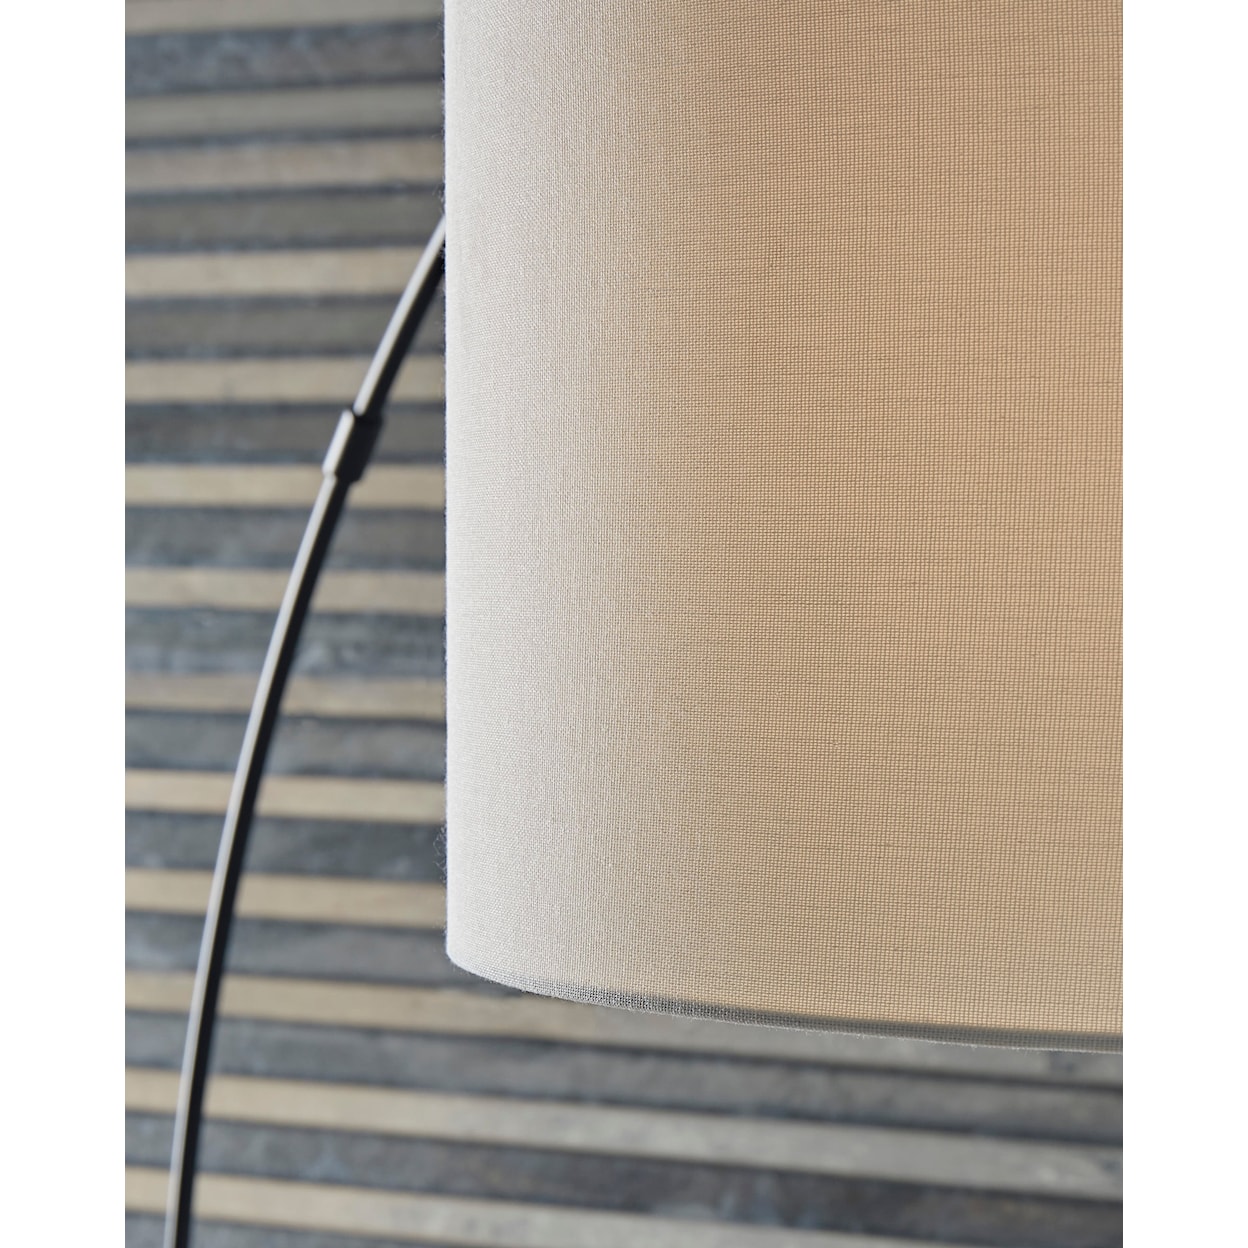 Signature Design by Ashley Lamps - Contemporary Veergate Arc Lamp